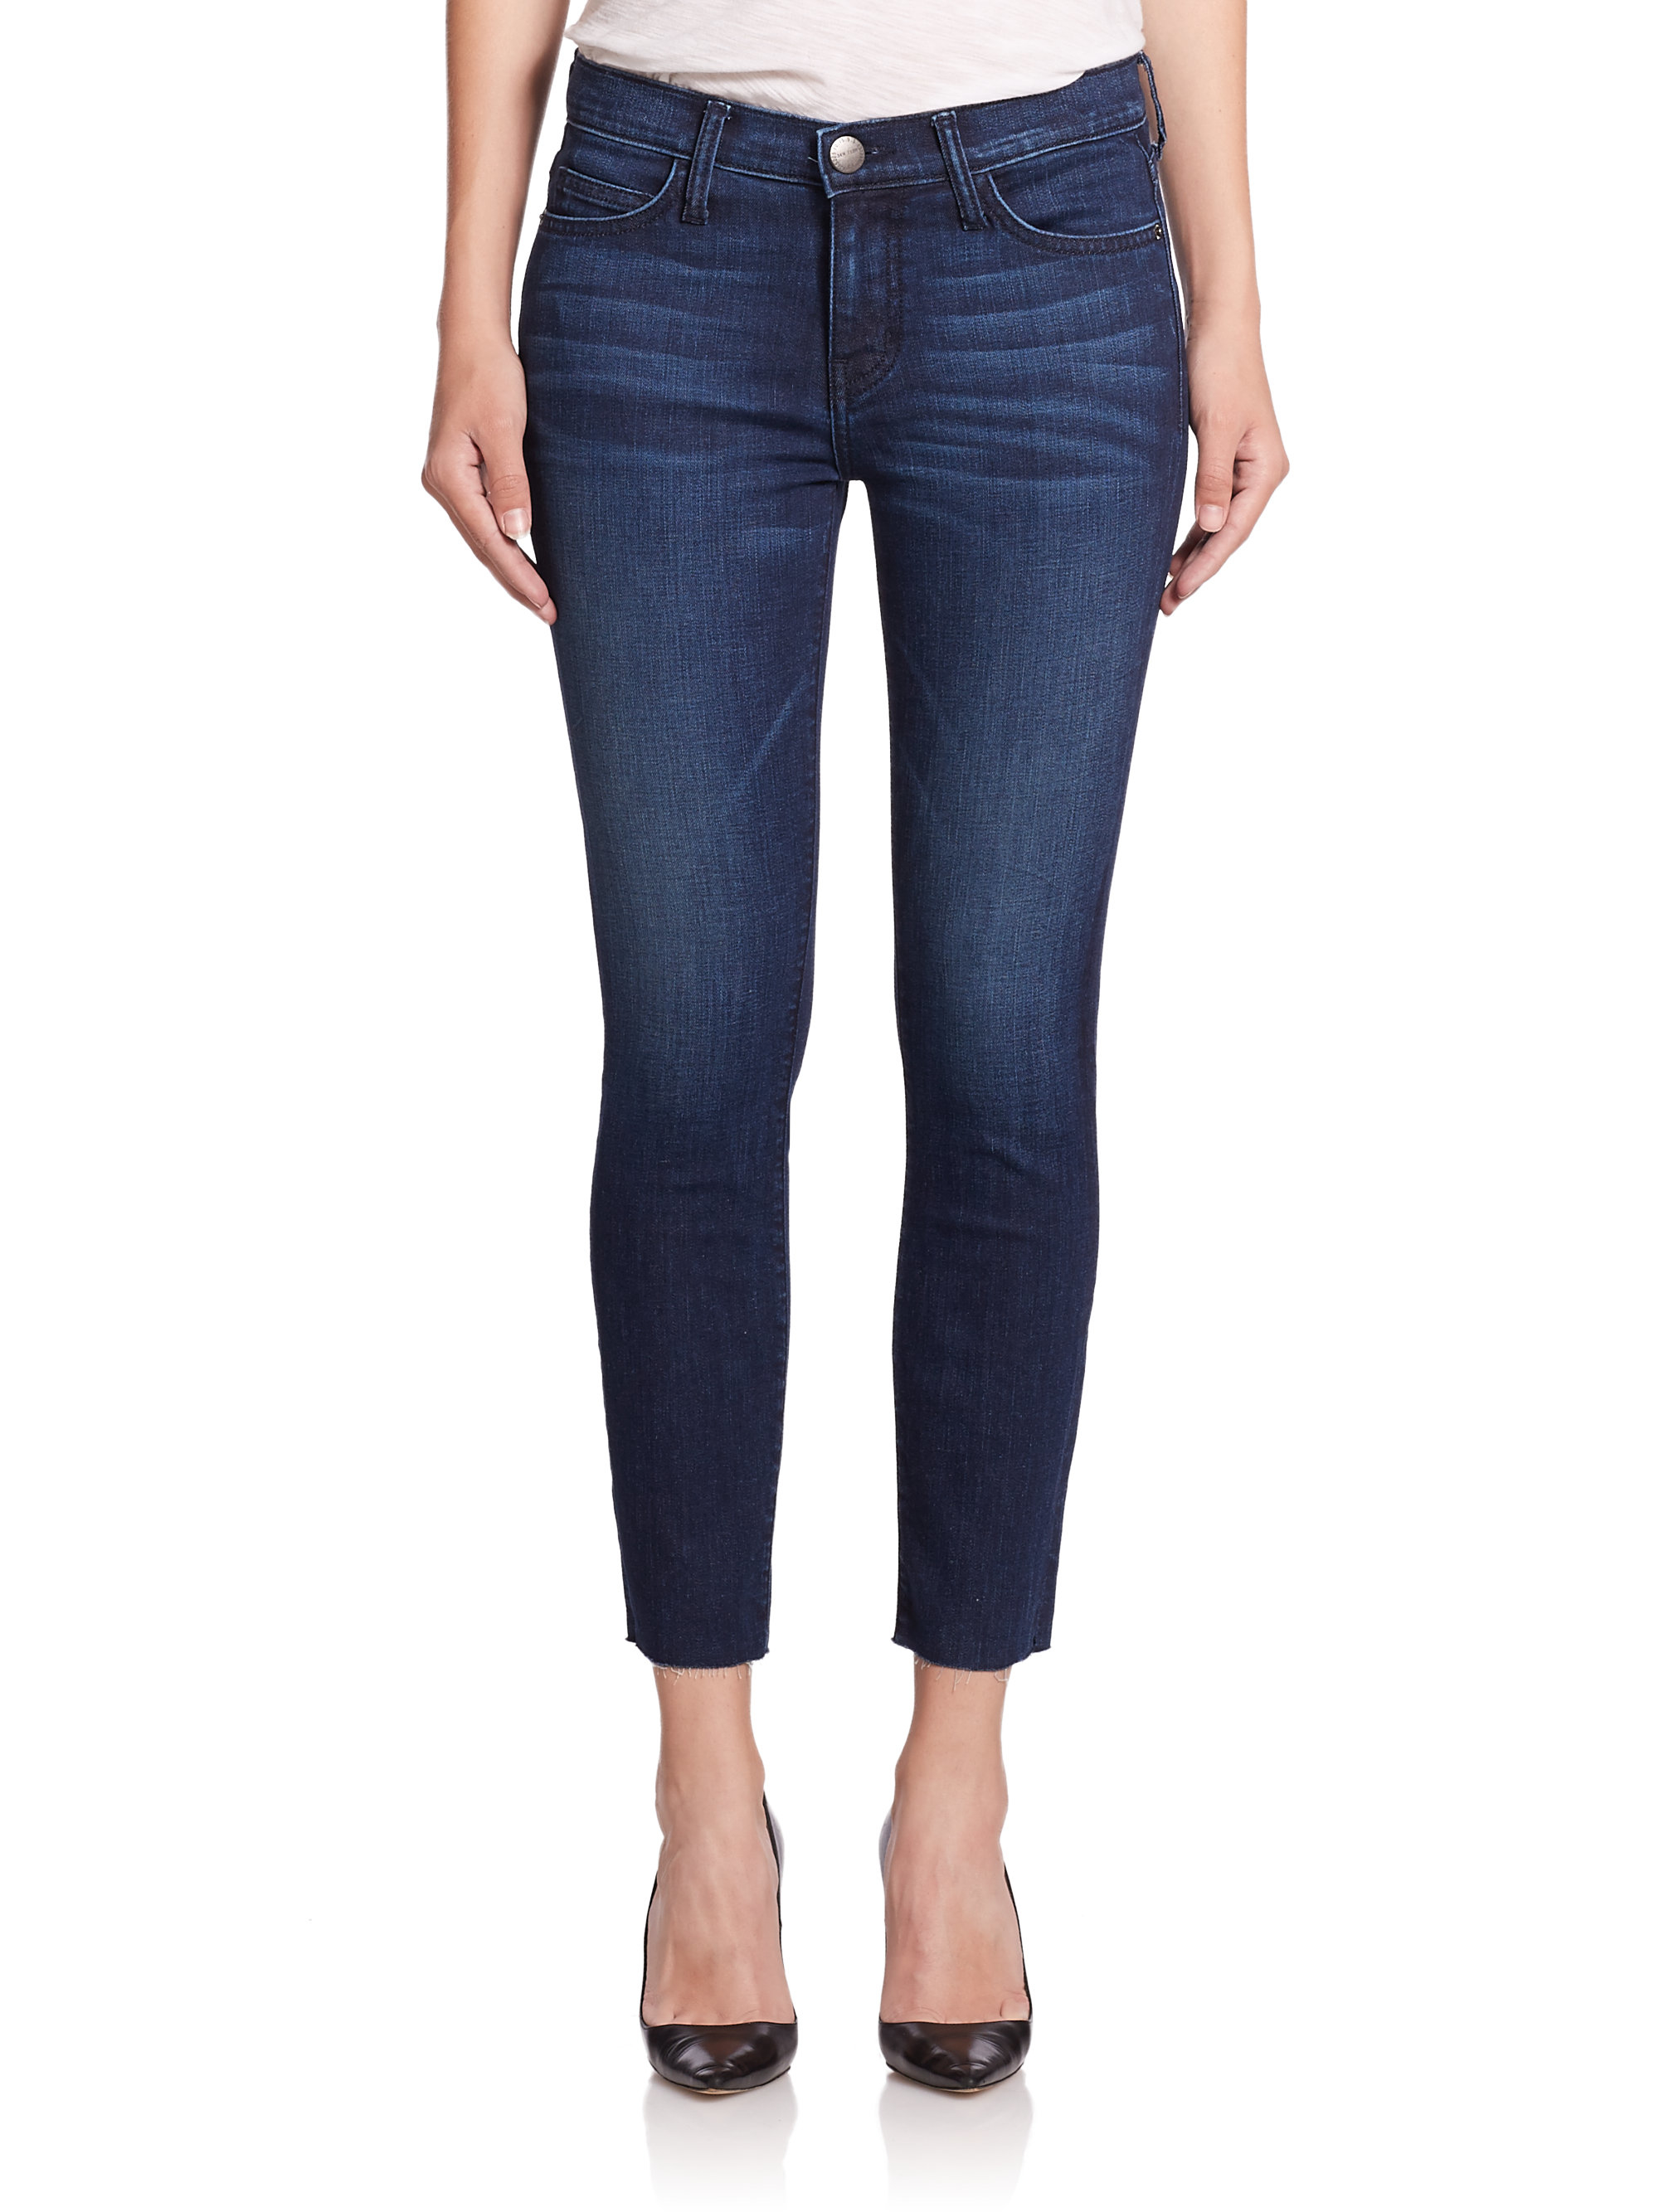 Lyst - Current/Elliott The Stiletto Skinny Jeans in Blue